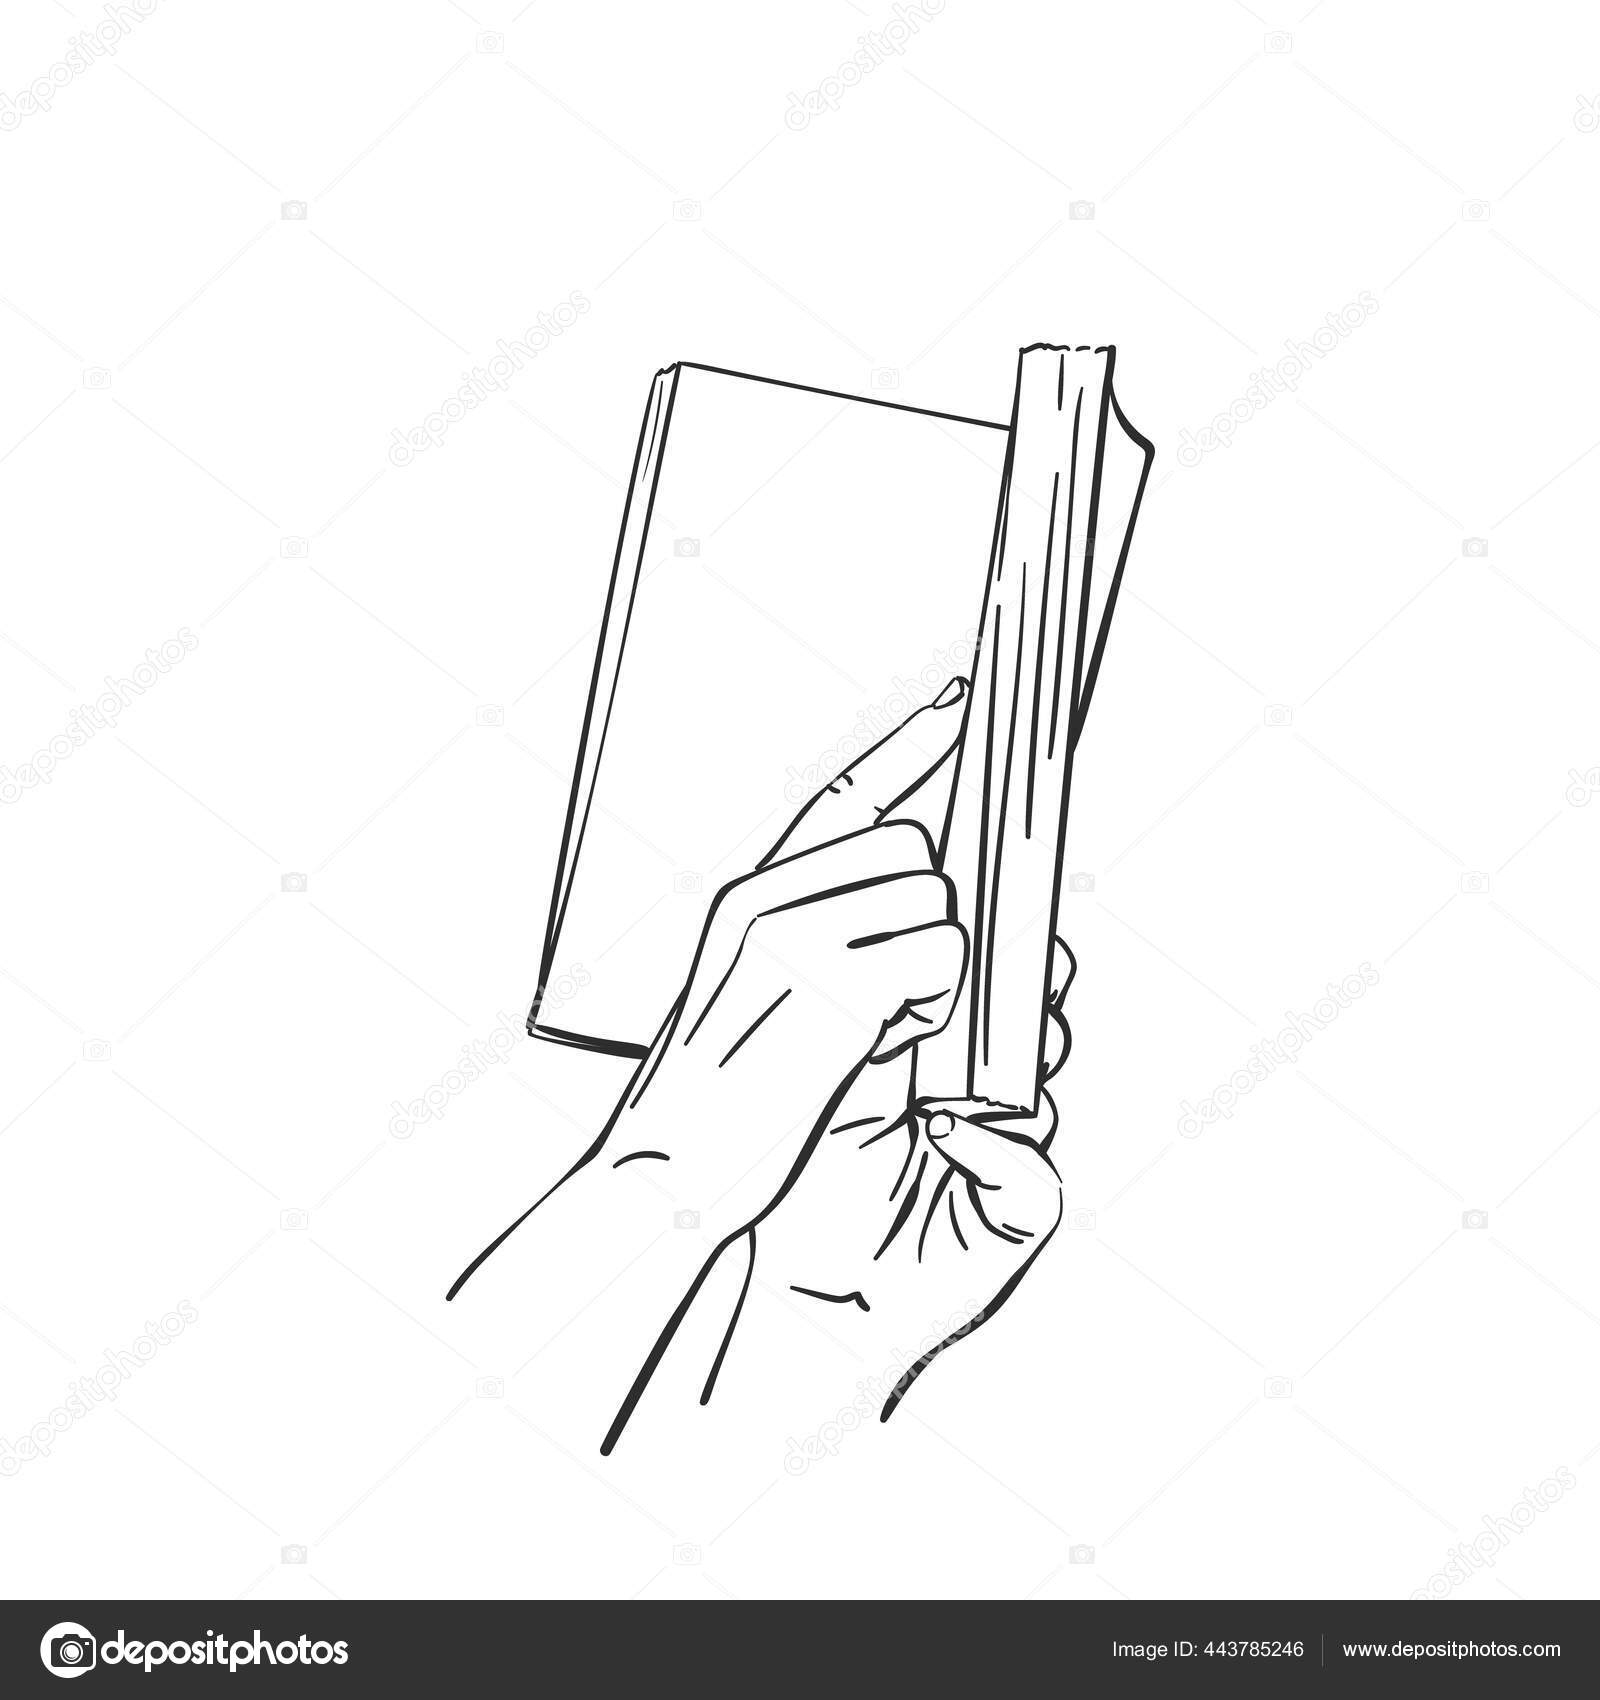 Paper book sketch vector illustration. Isolated hand drawn